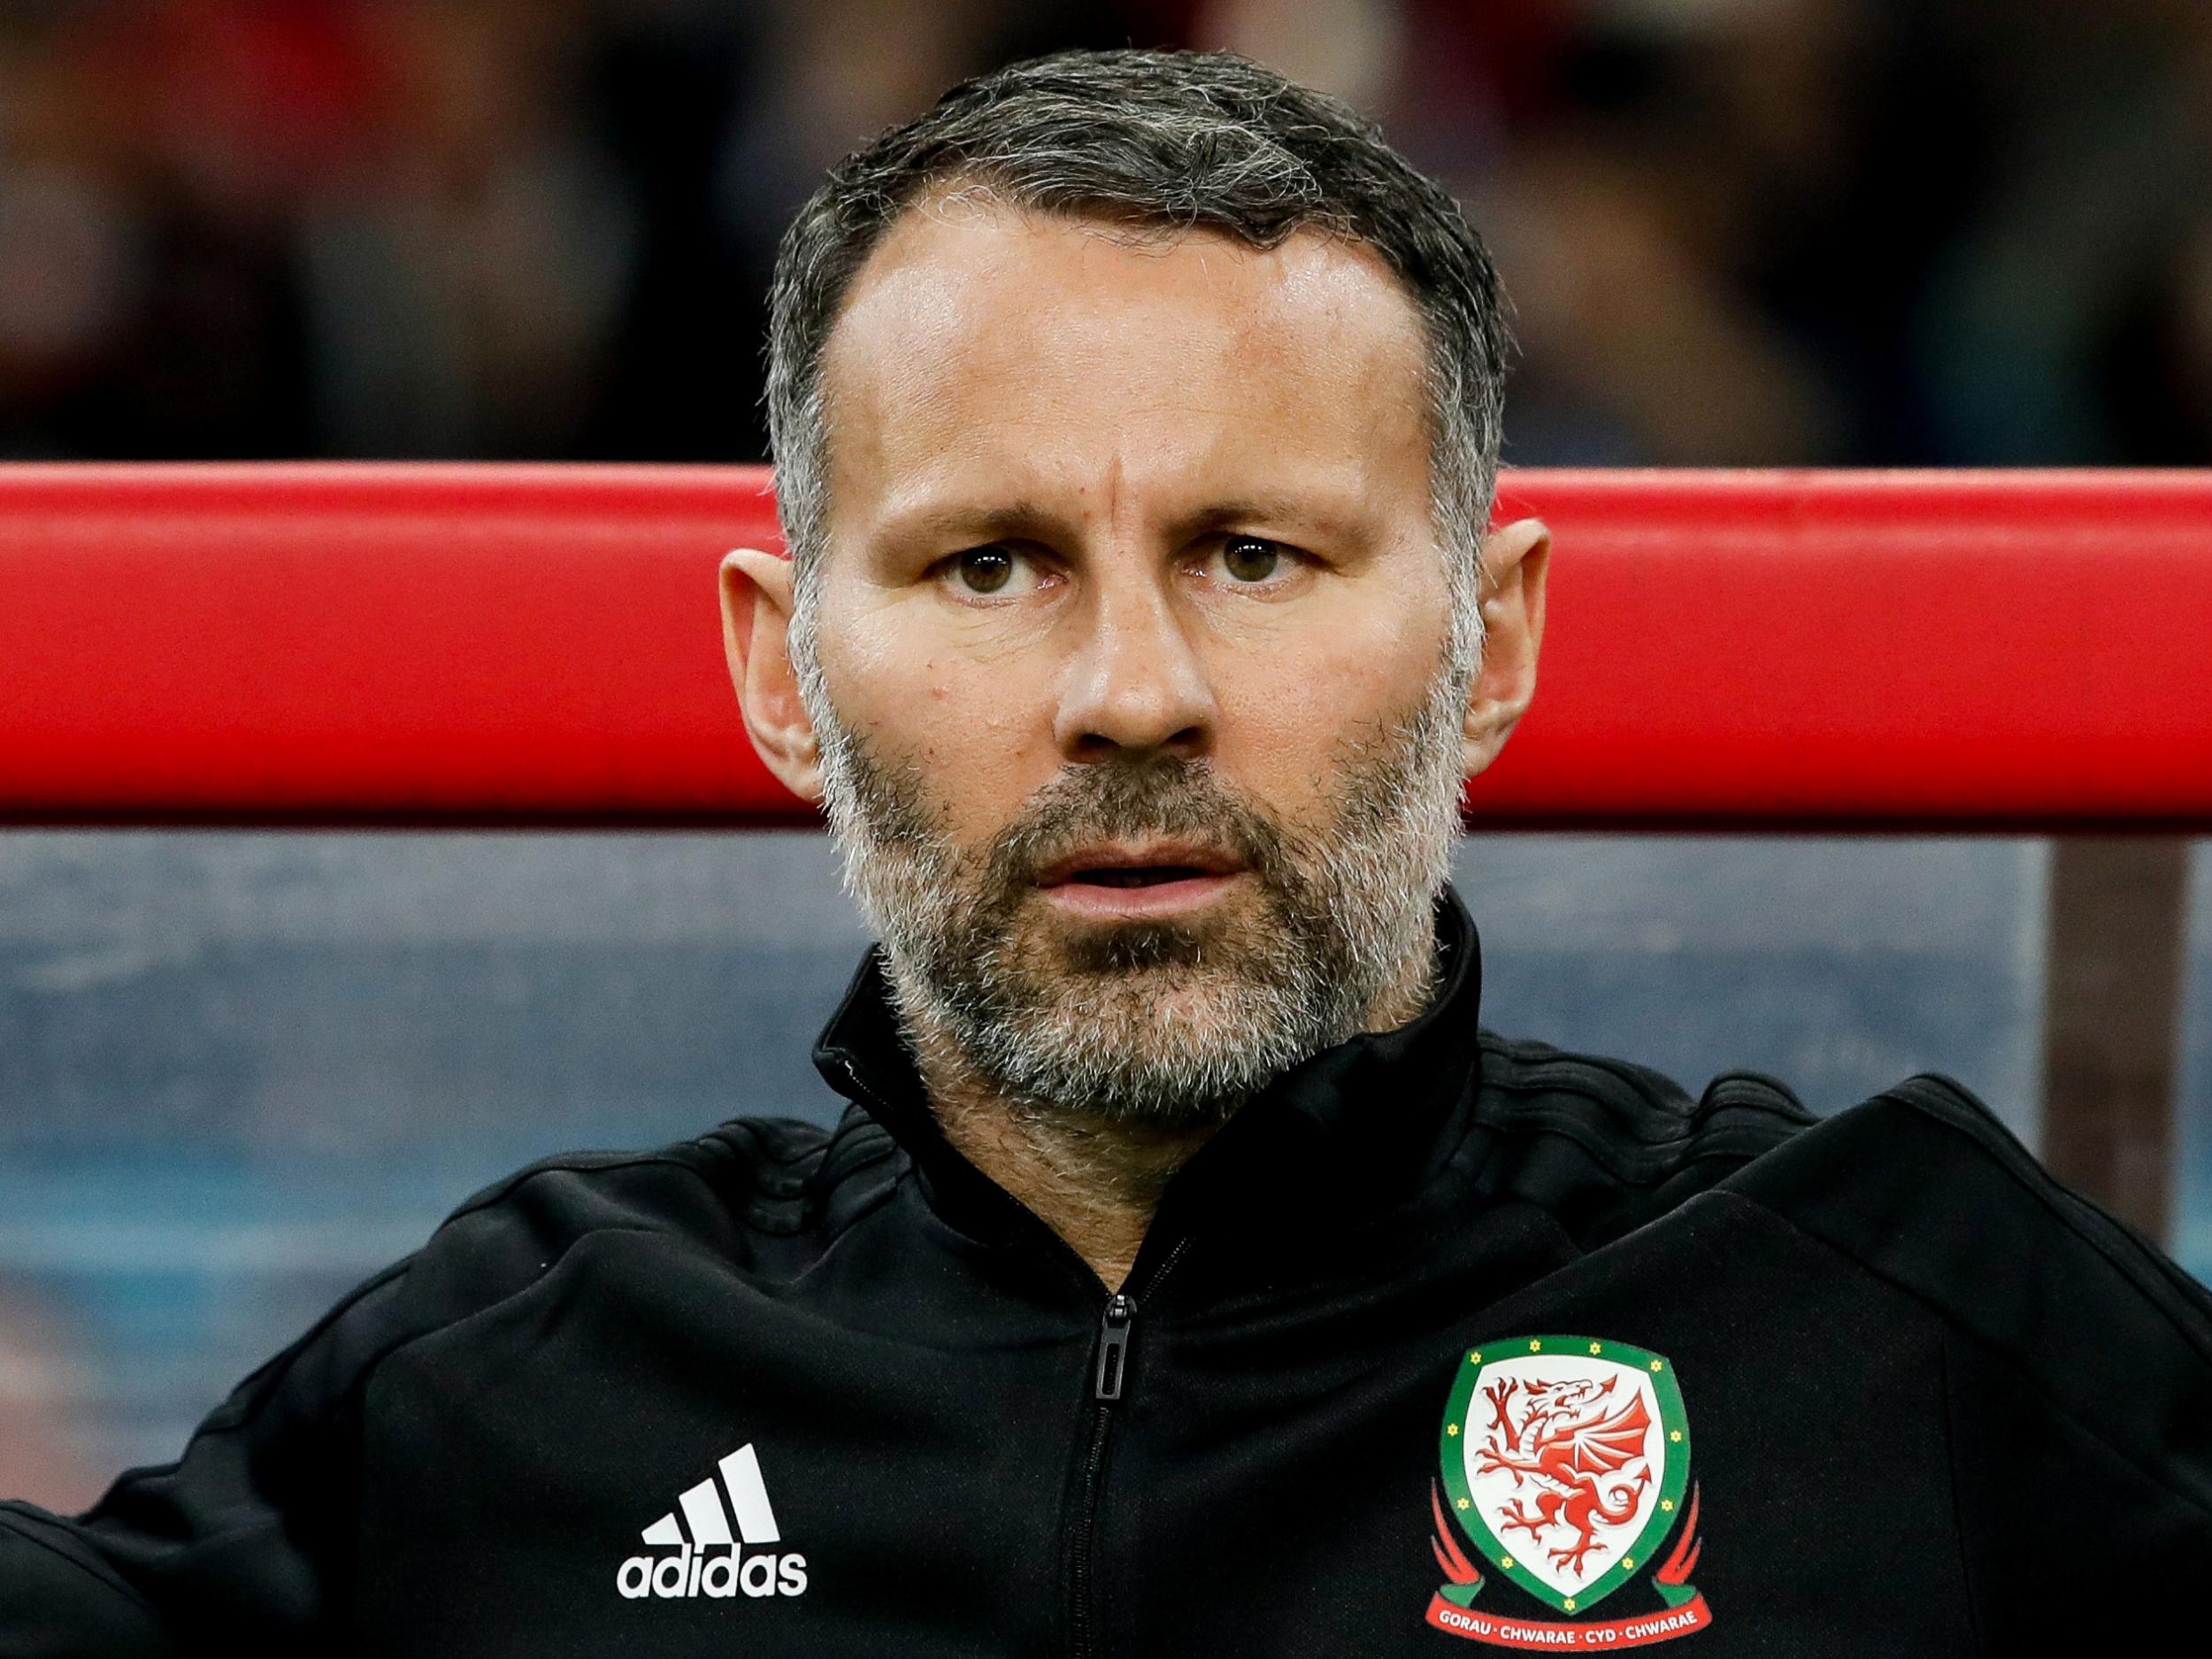 &#13;
Giggs tasted defeat for the first time with Wales &#13;